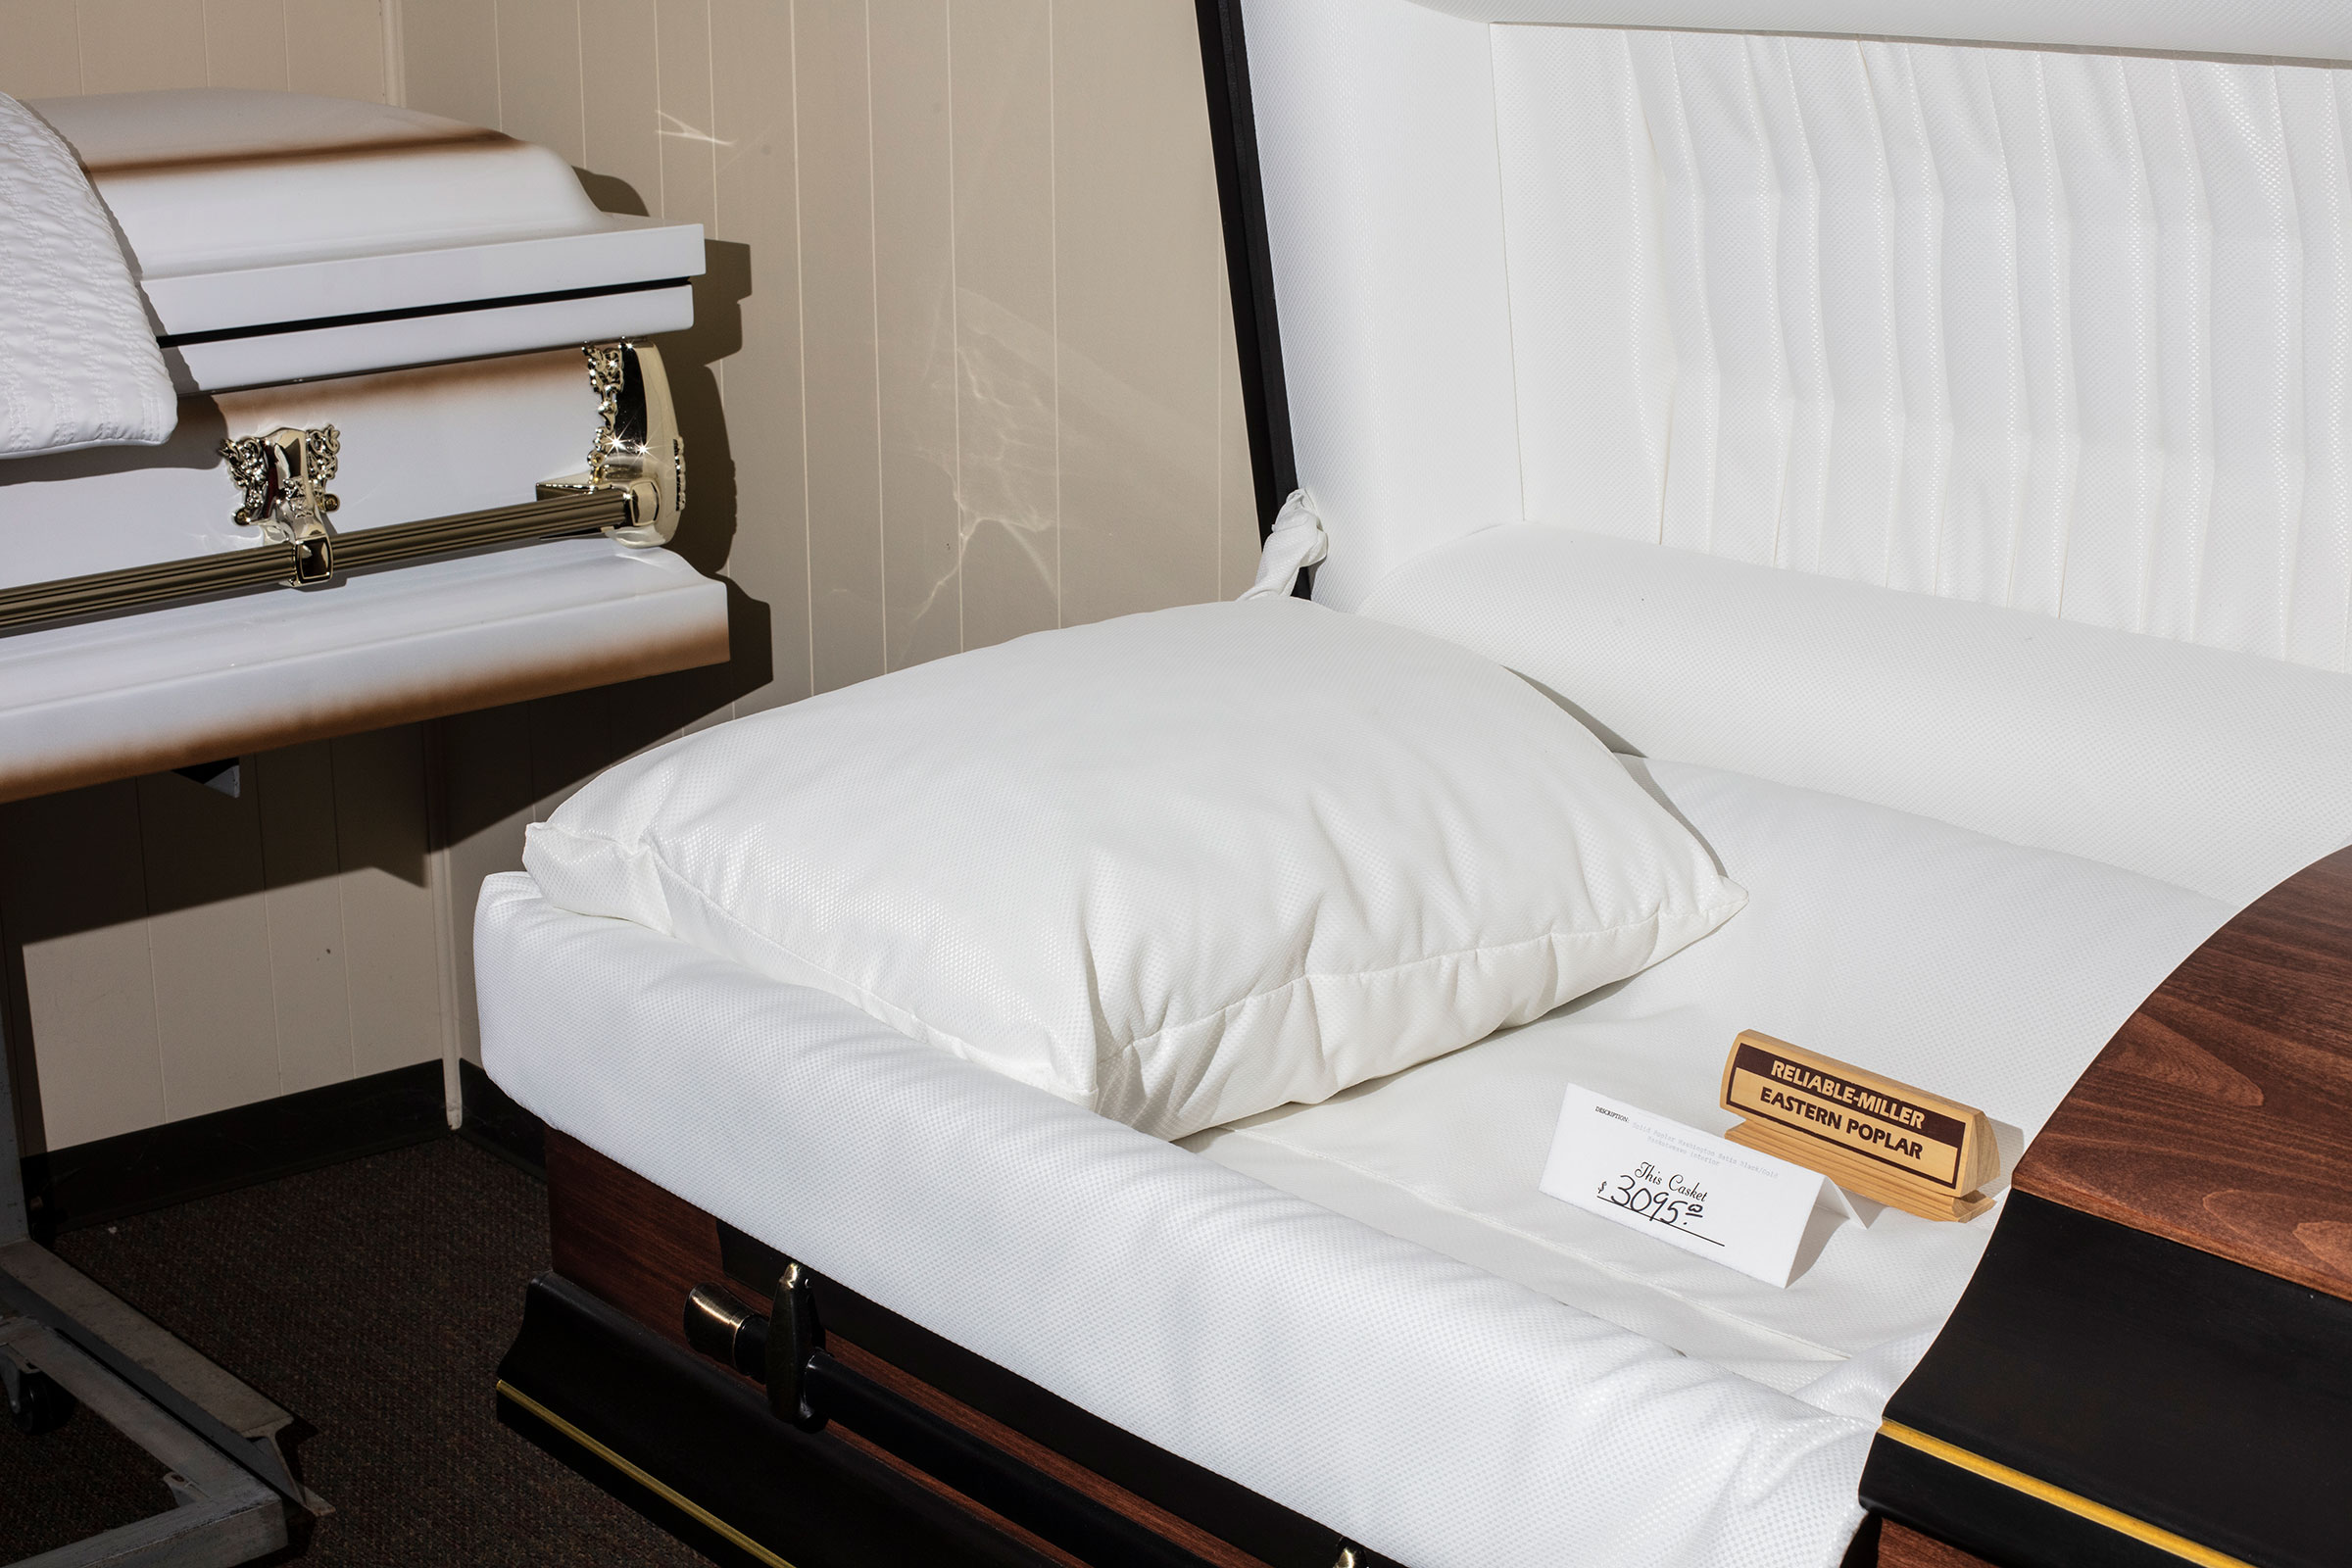 Caskets in a showroom at Galante Funeral Home (Bryan Anselm for TIME)